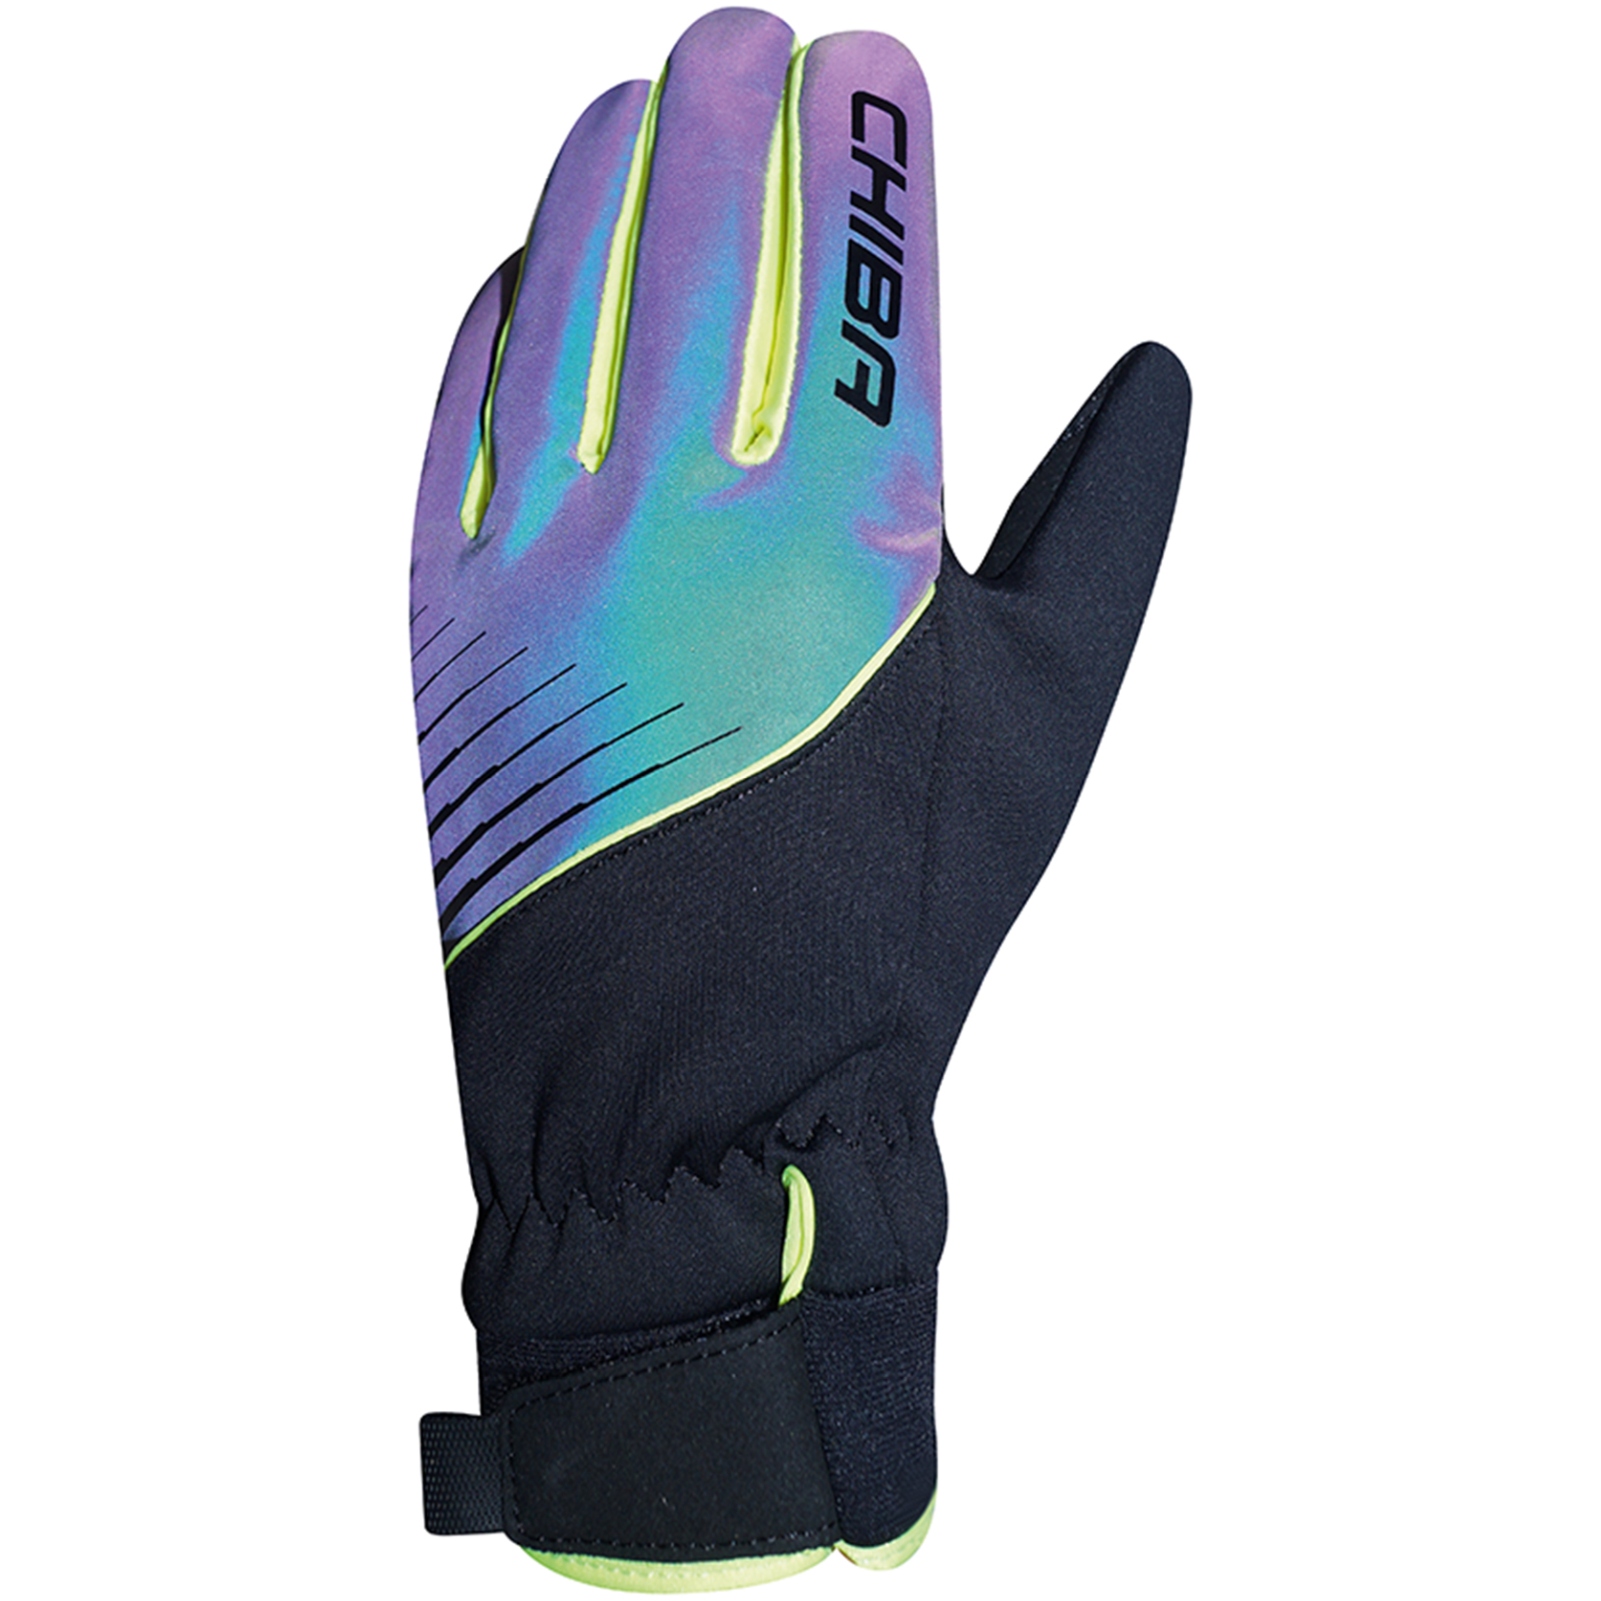 Picture of Chiba Kids Waterproof Cycling Gloves - rainbow reflective/black